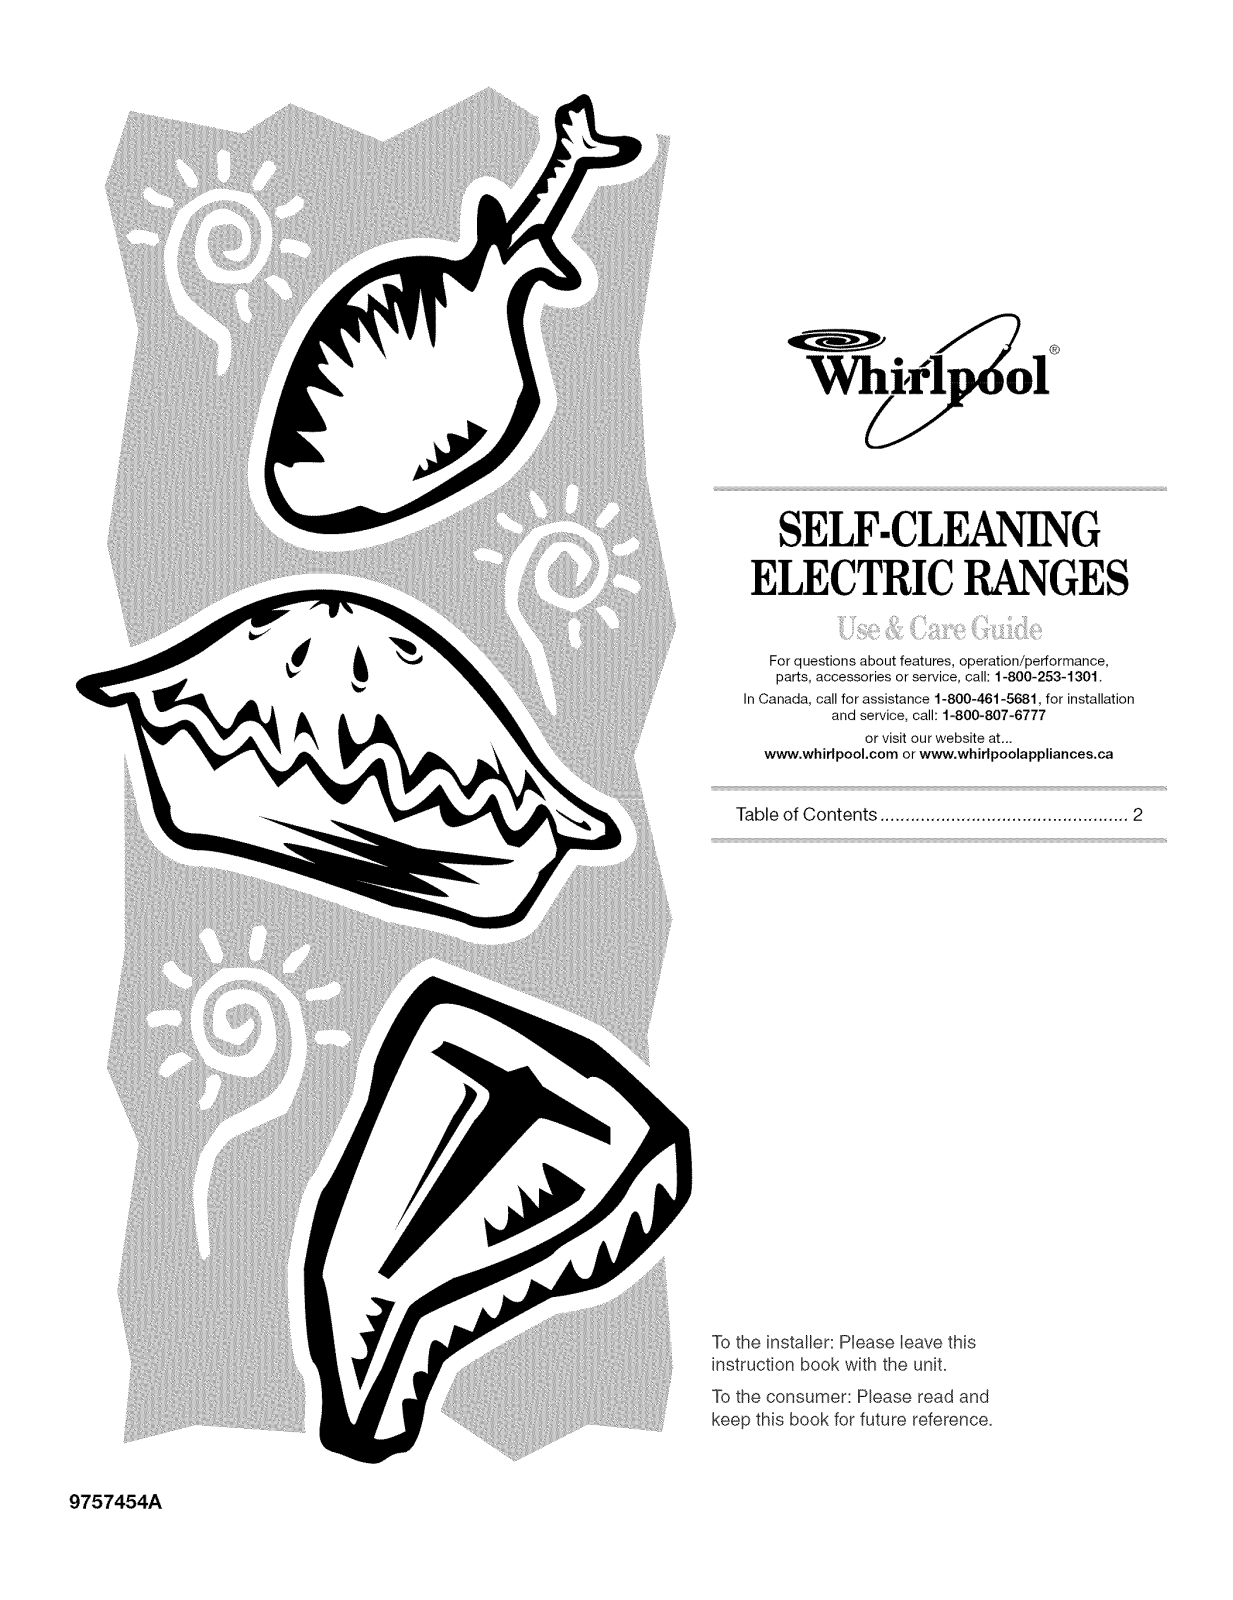 Whirlpool GY396LXPB00, GY396LXPQ00, GY396LXPS00, GY396LXPT00, GY398LXPB00 Owner’s Manual